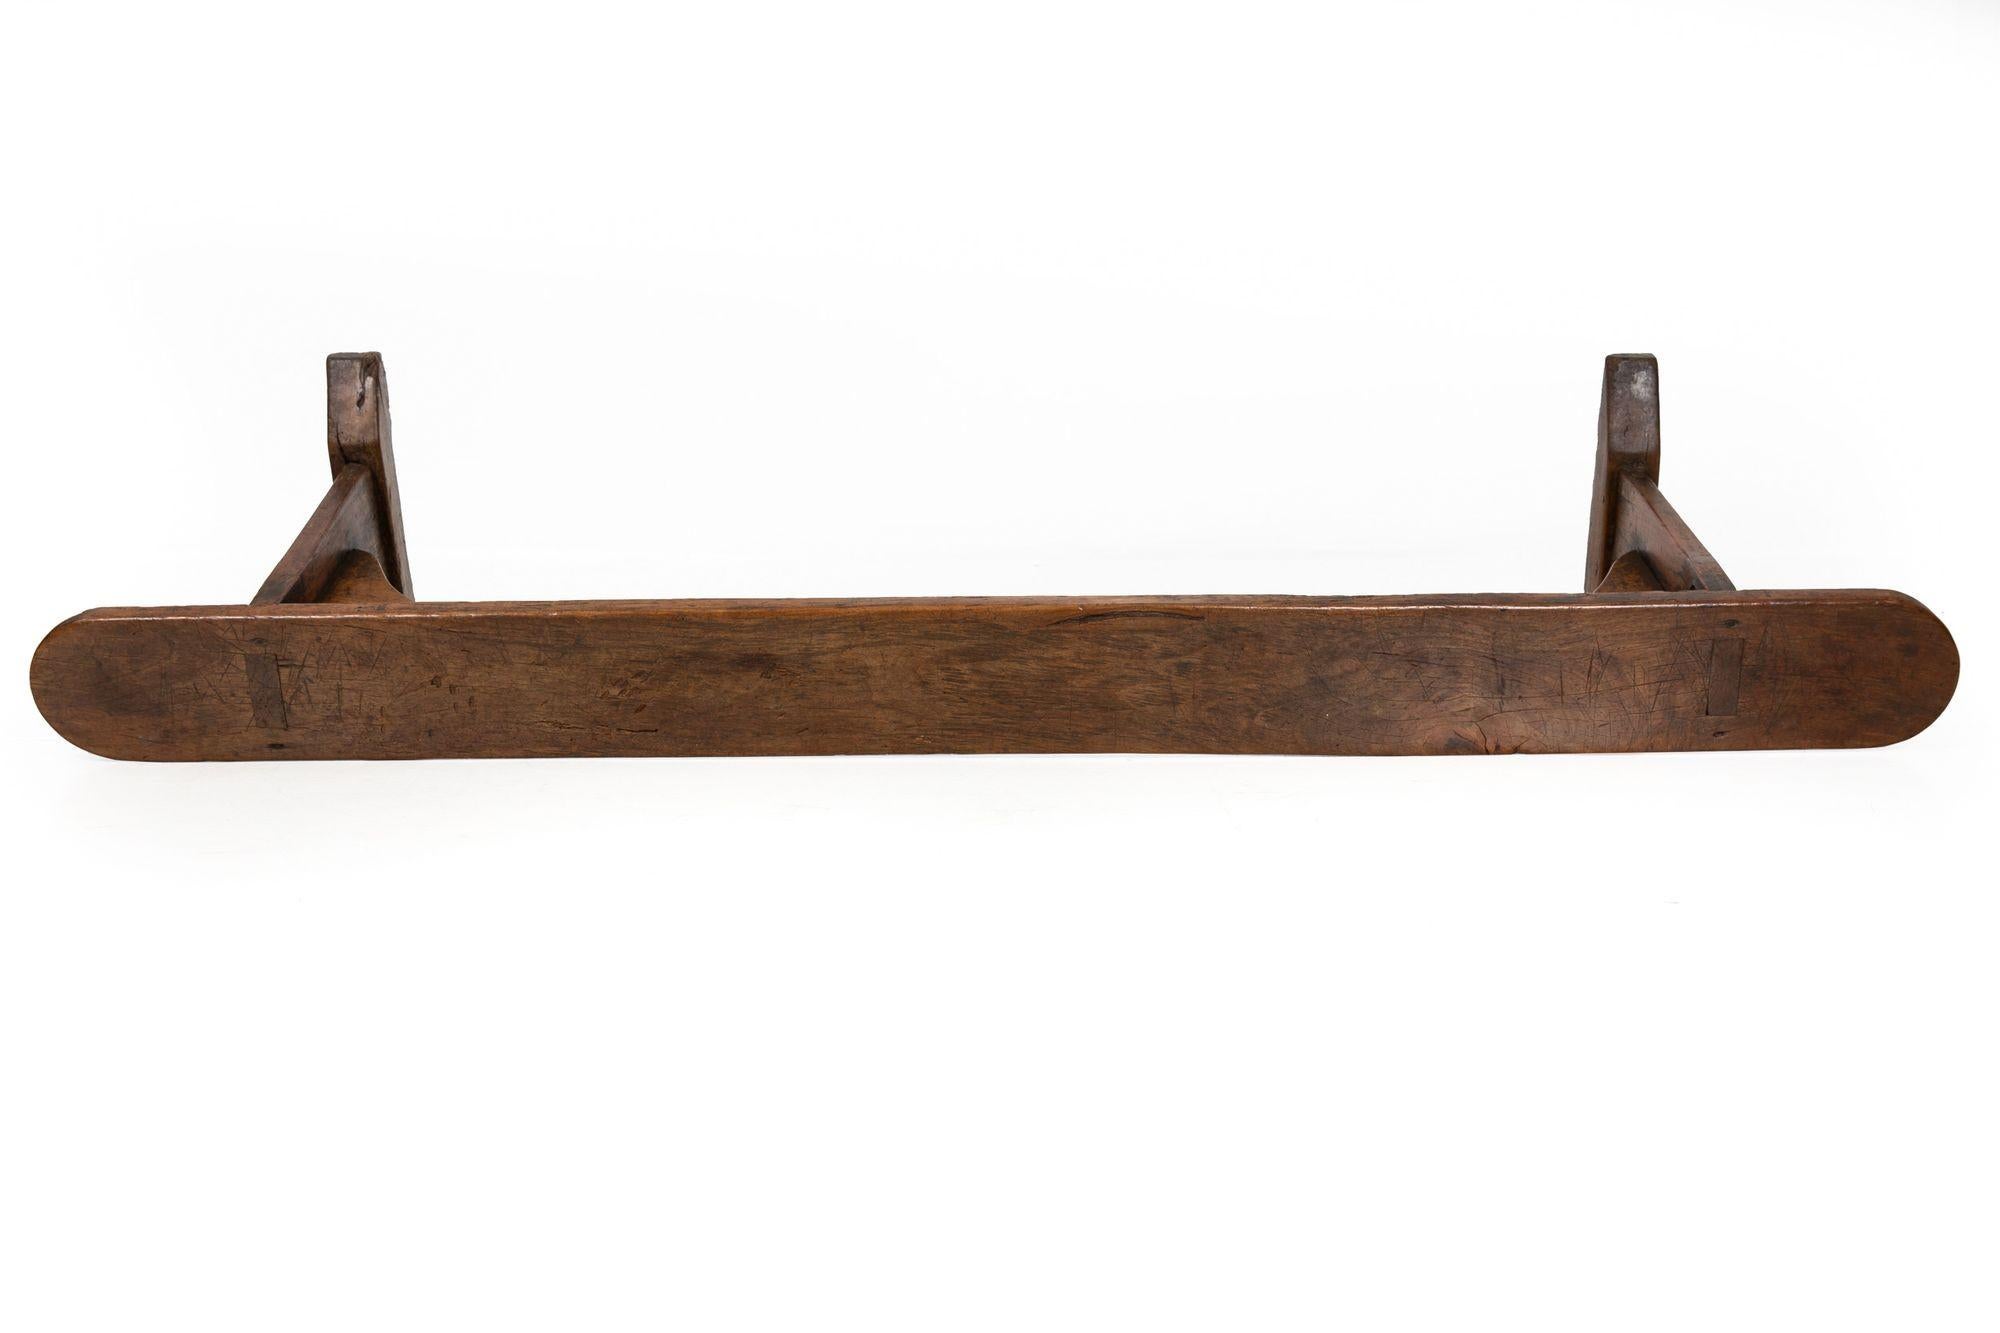 circa 1750 English Georgian Patinated and Worn Elm Trestle Bench For Sale 8